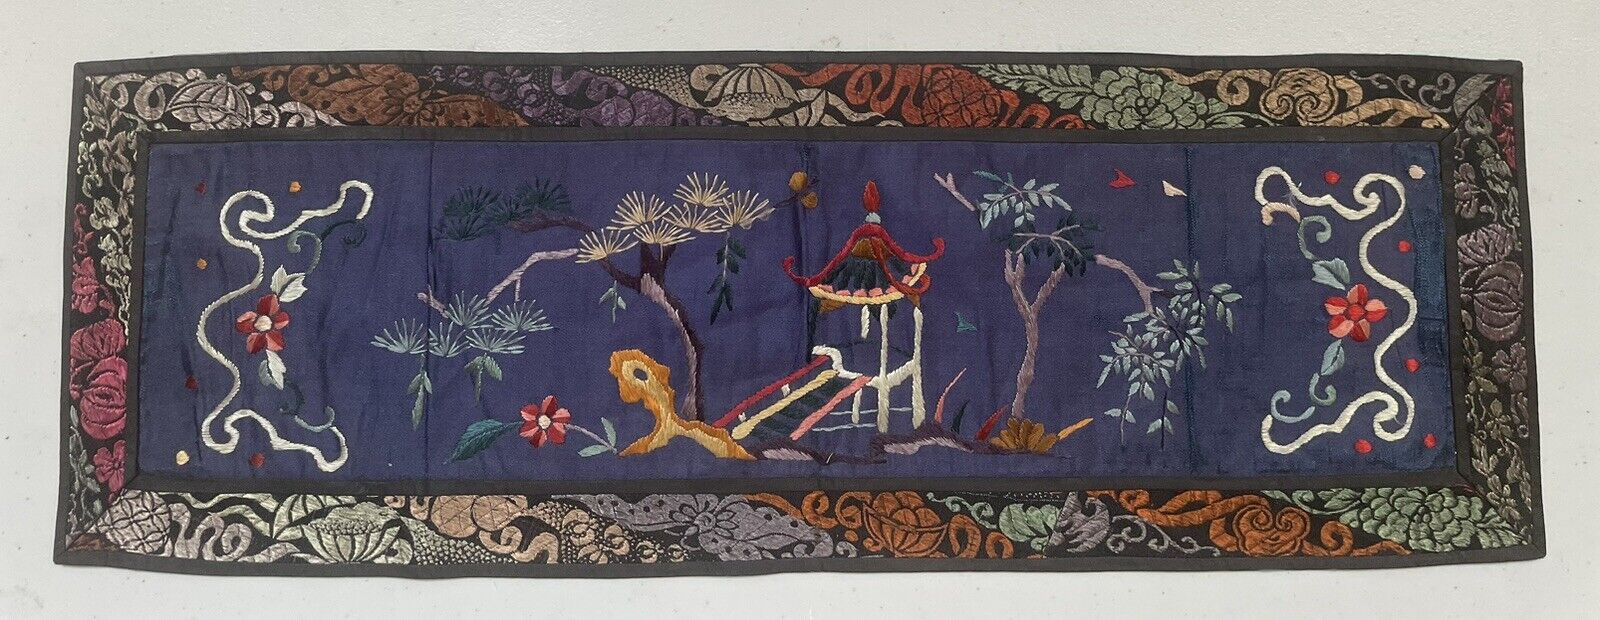 VTG-AQ Chinese Wall Hanging Decorative Hand Embroidery Panel Garden Scenic-23.5”